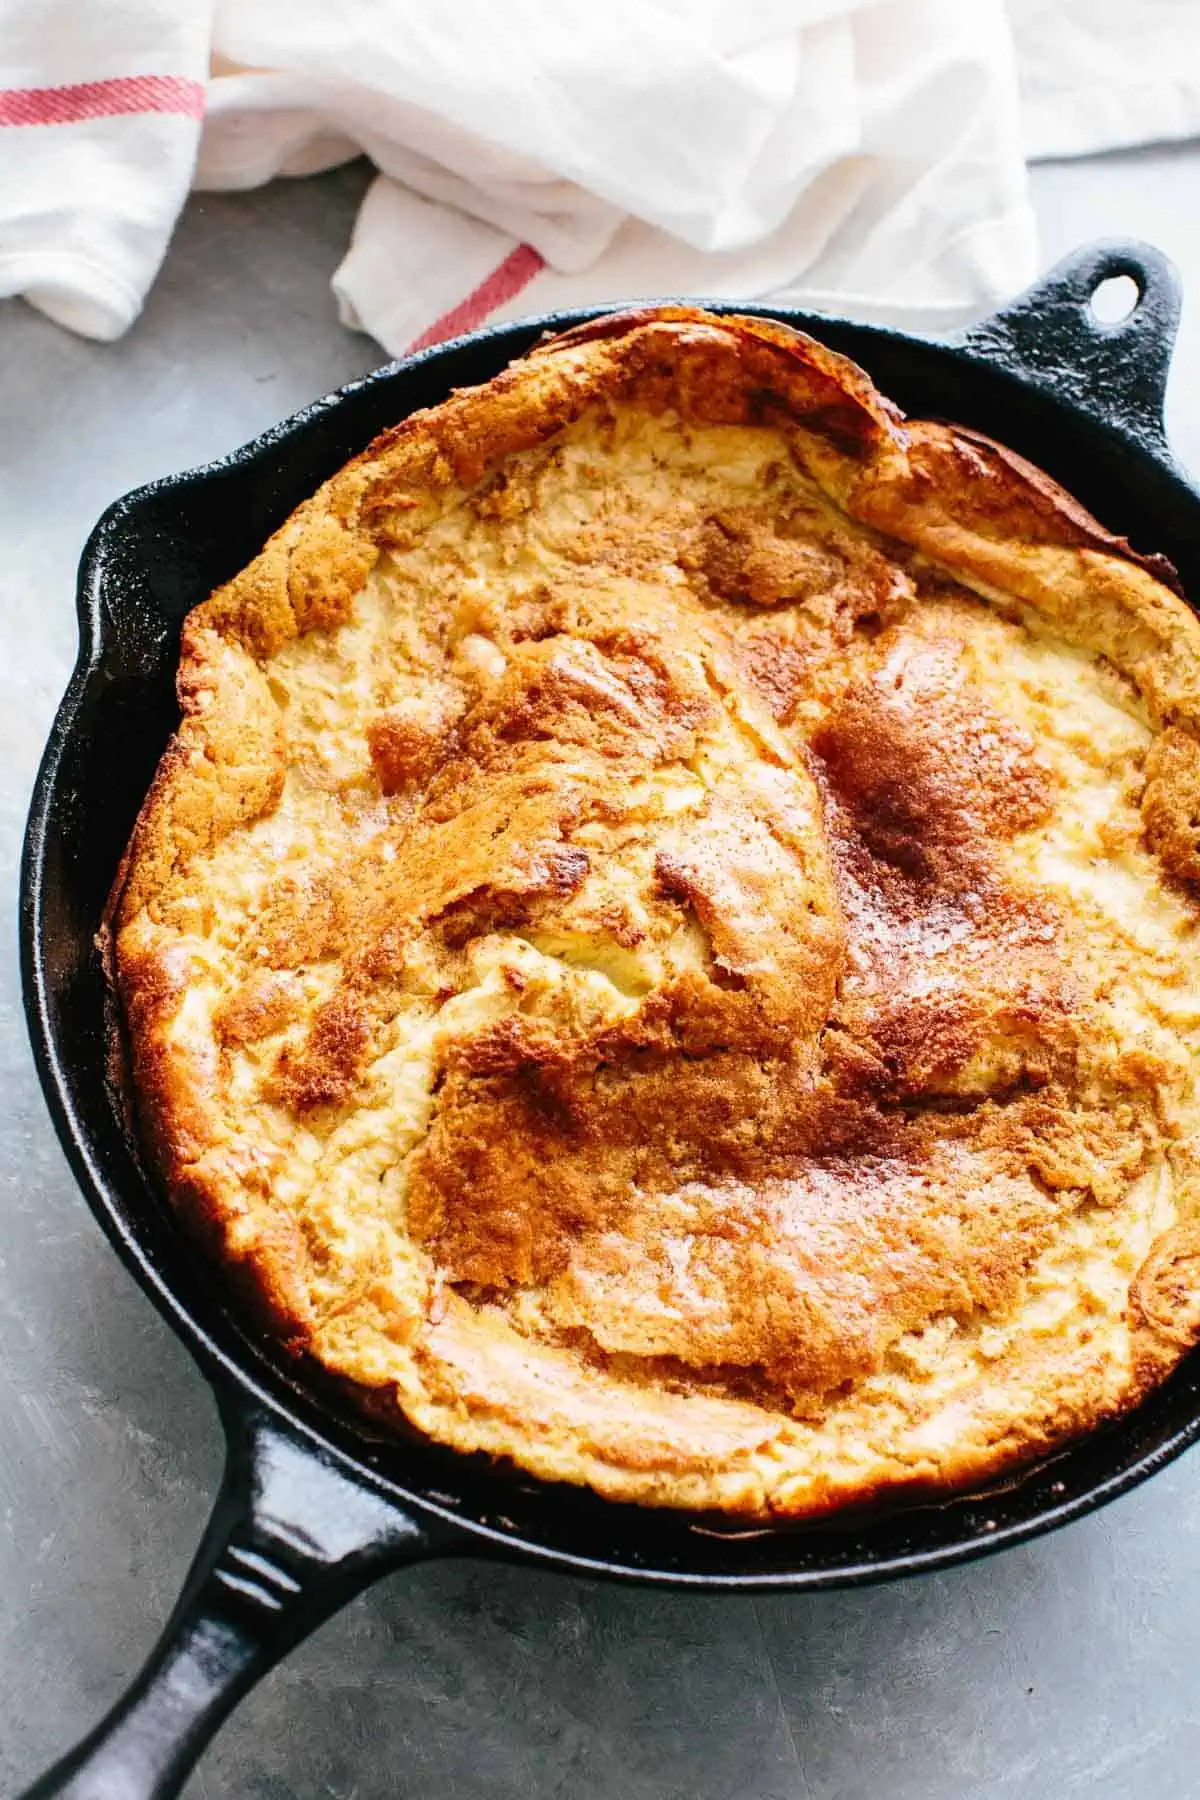 A close up of a Dutch baby pancake in a cast iron skillet.